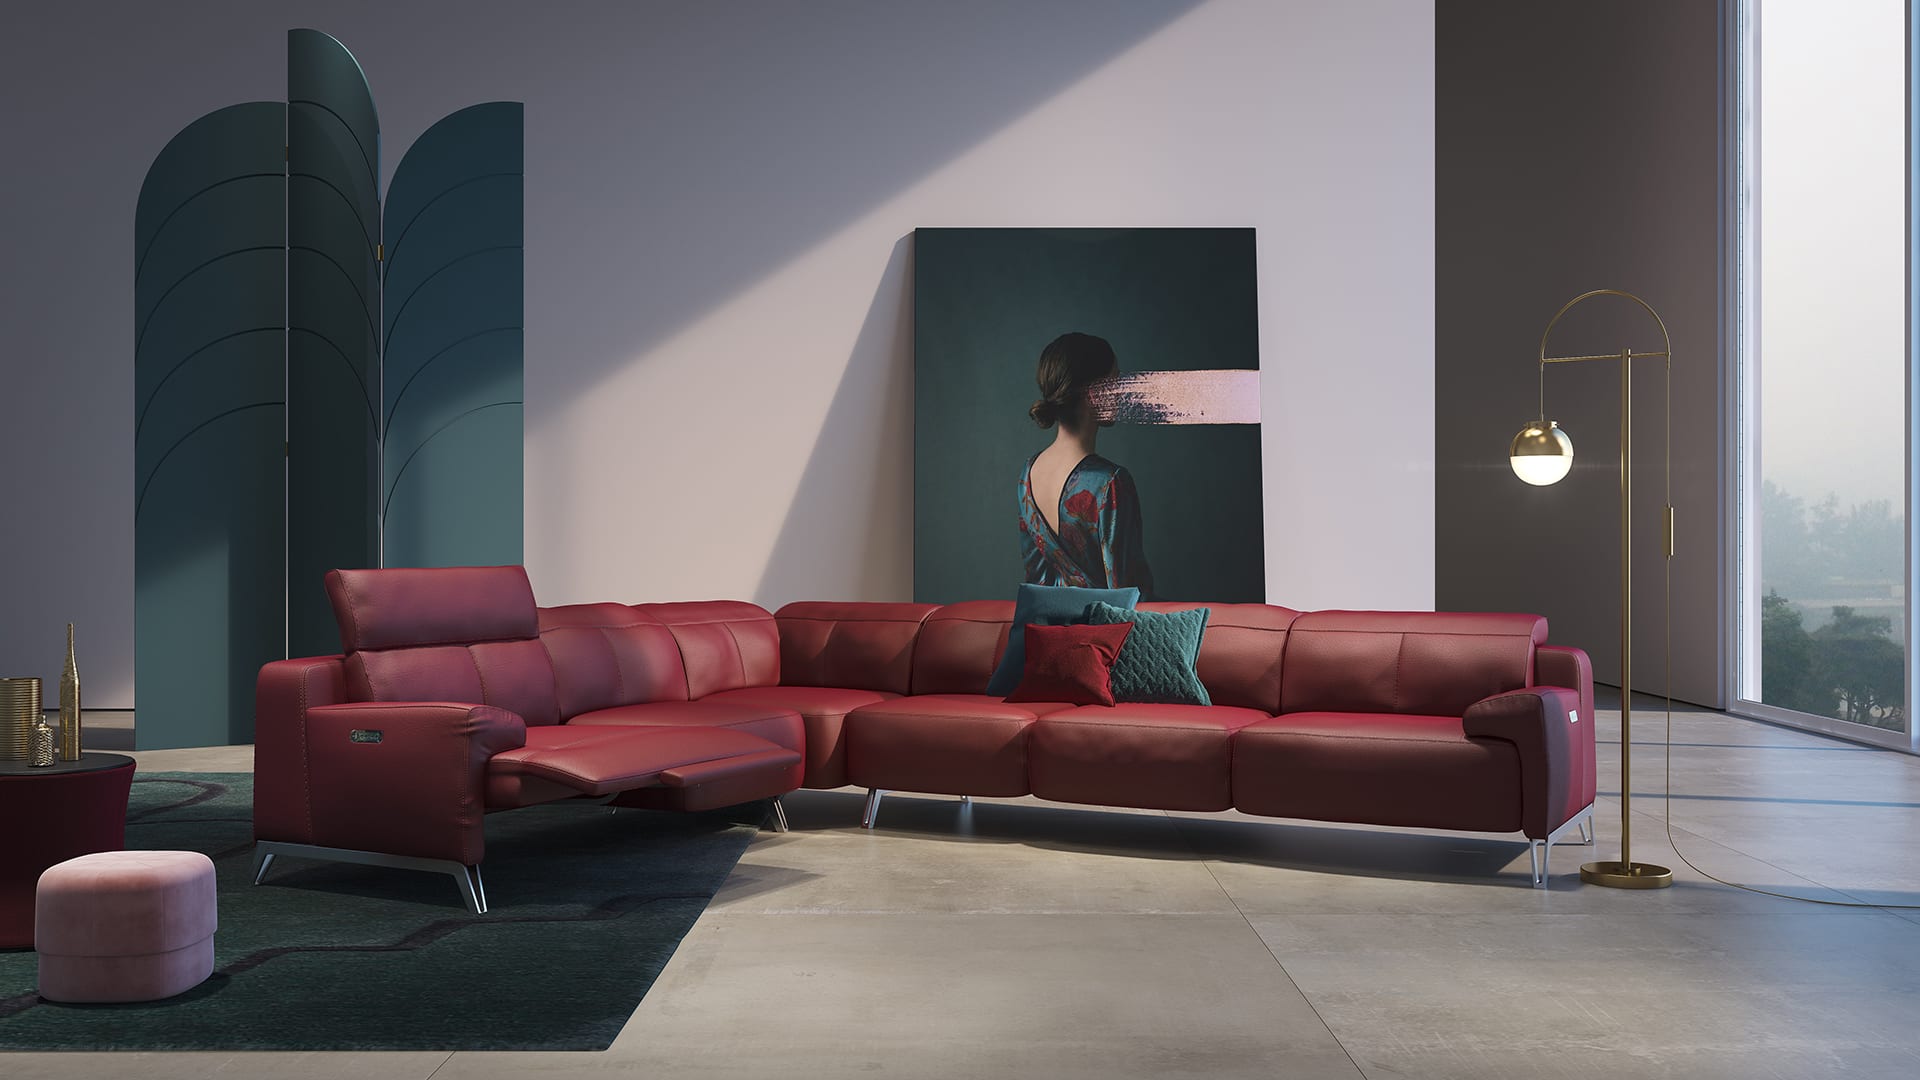 Maayan-Golan_Architectural-Visualization_product-visualization_living-room-sofa_rossetto-furniture_01